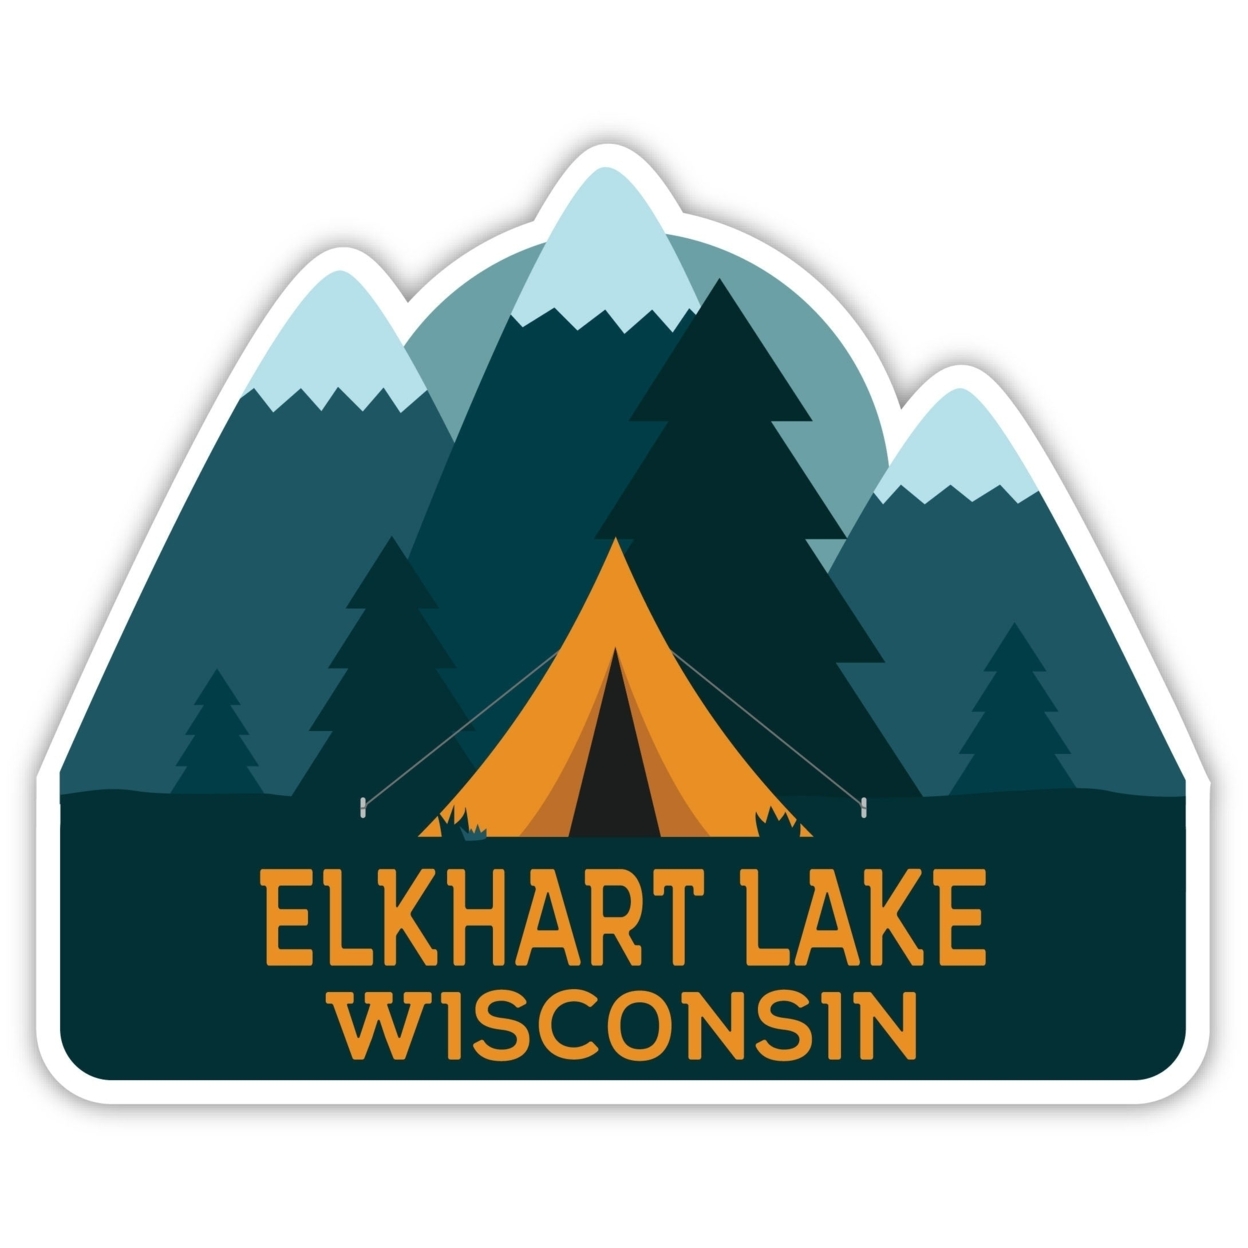 Elkhart Lake Wisconsin Souvenir Decorative Stickers (Choose Theme And Size) - 4-Pack, 10-Inch, Tent